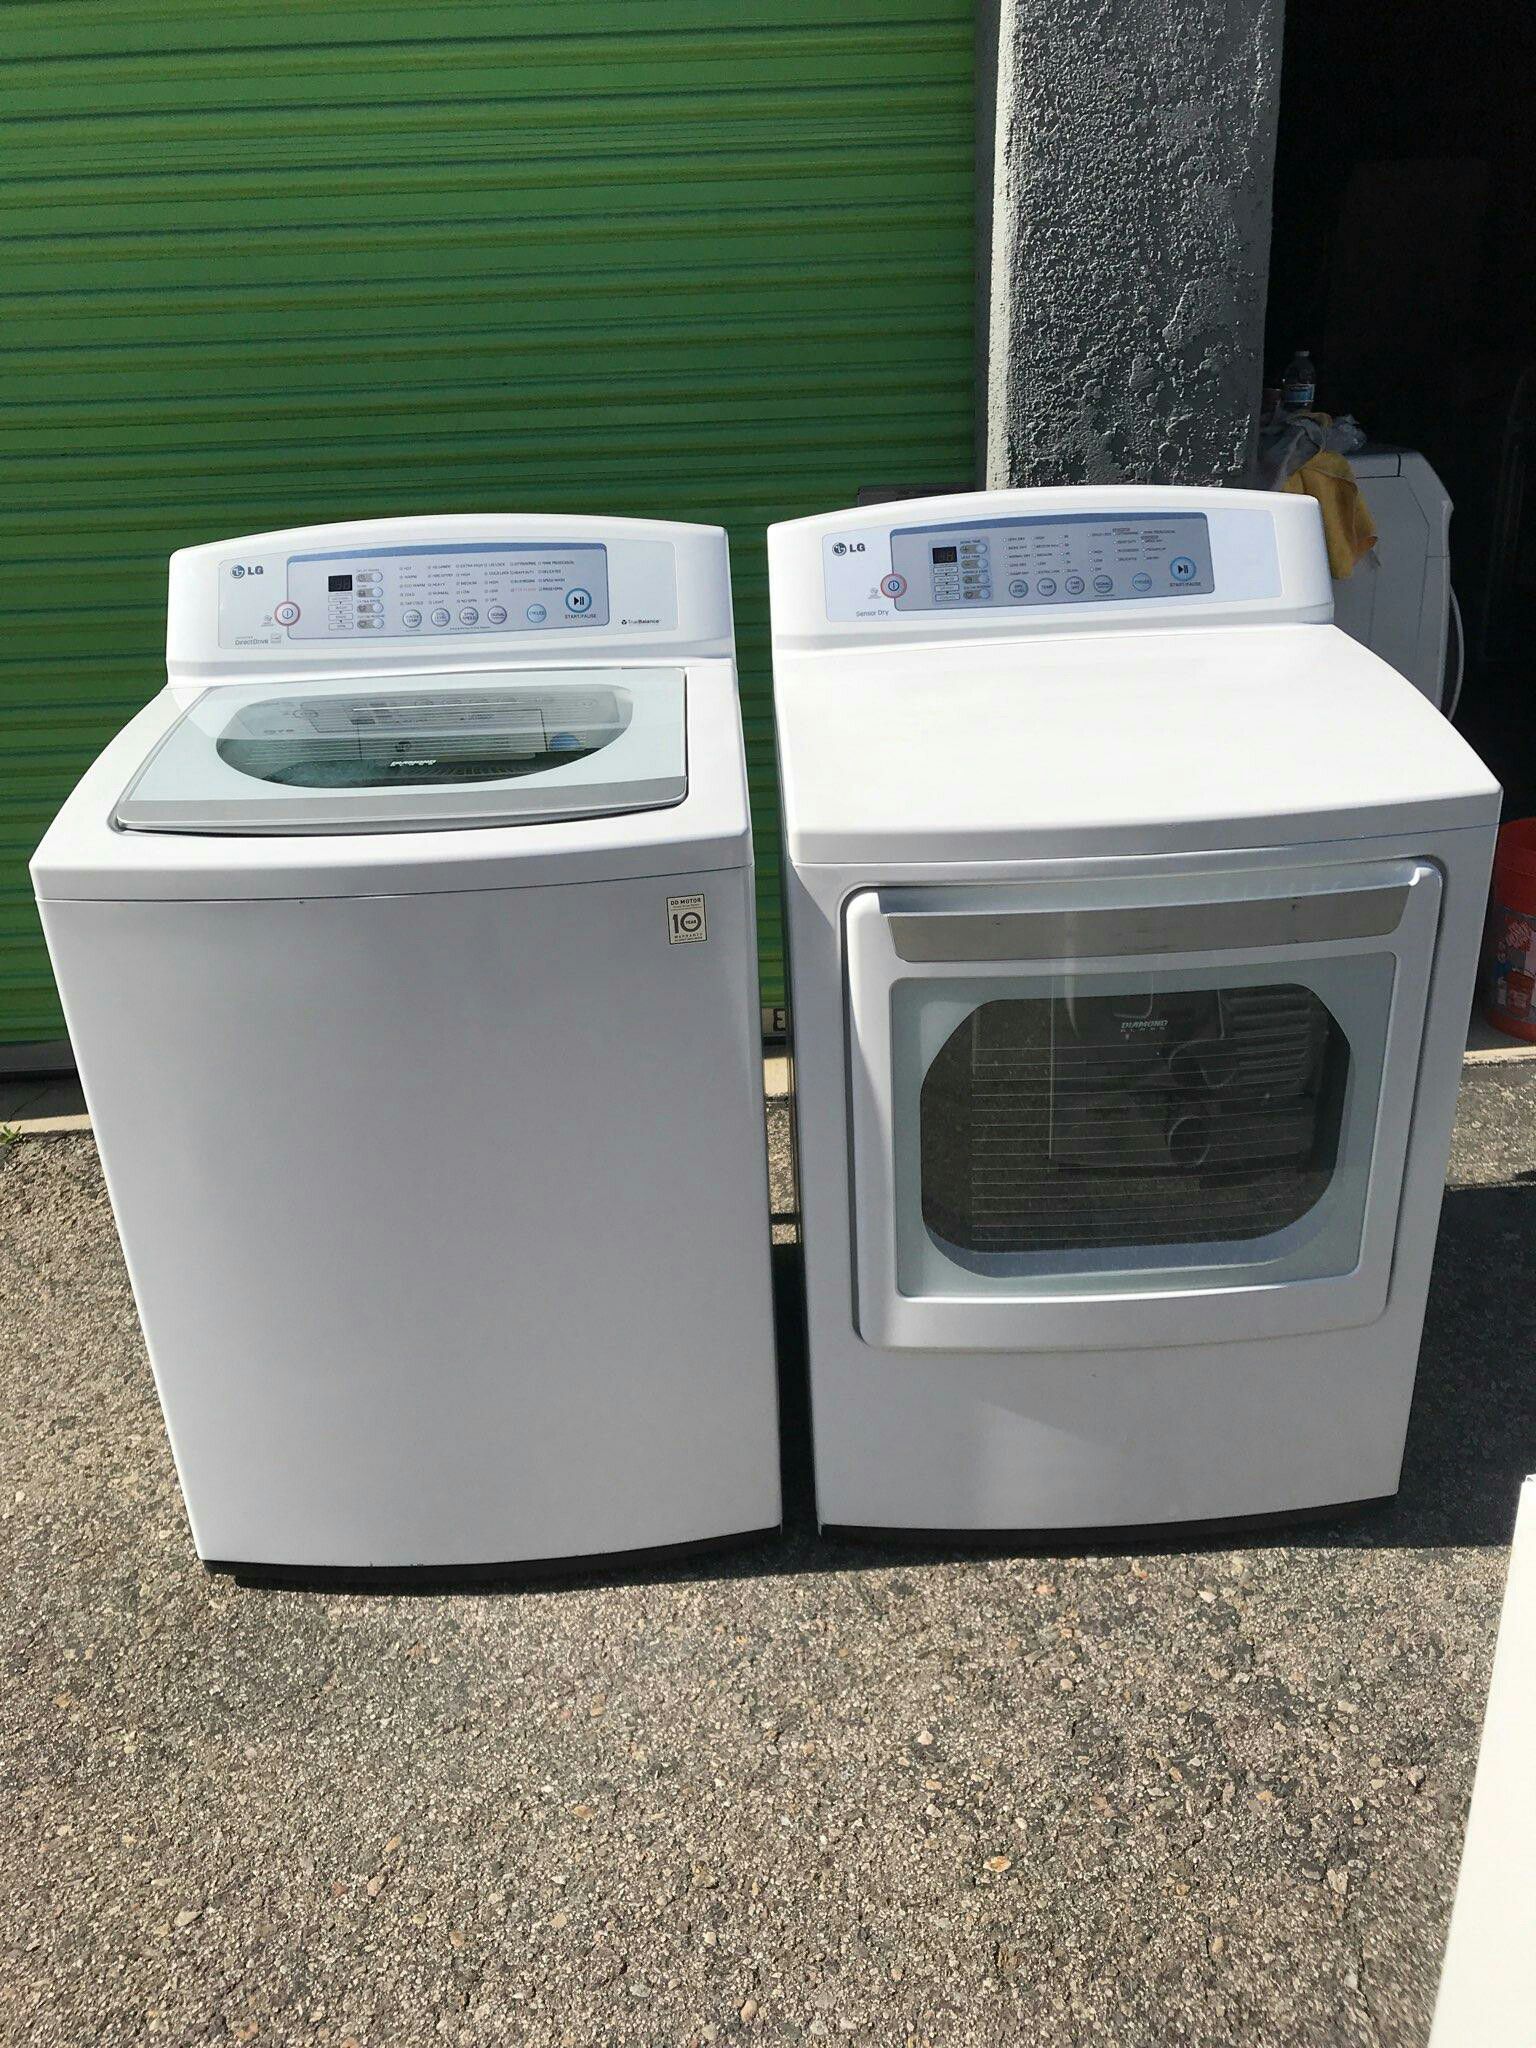 LG TOP LOAD WASHER AND DRYER